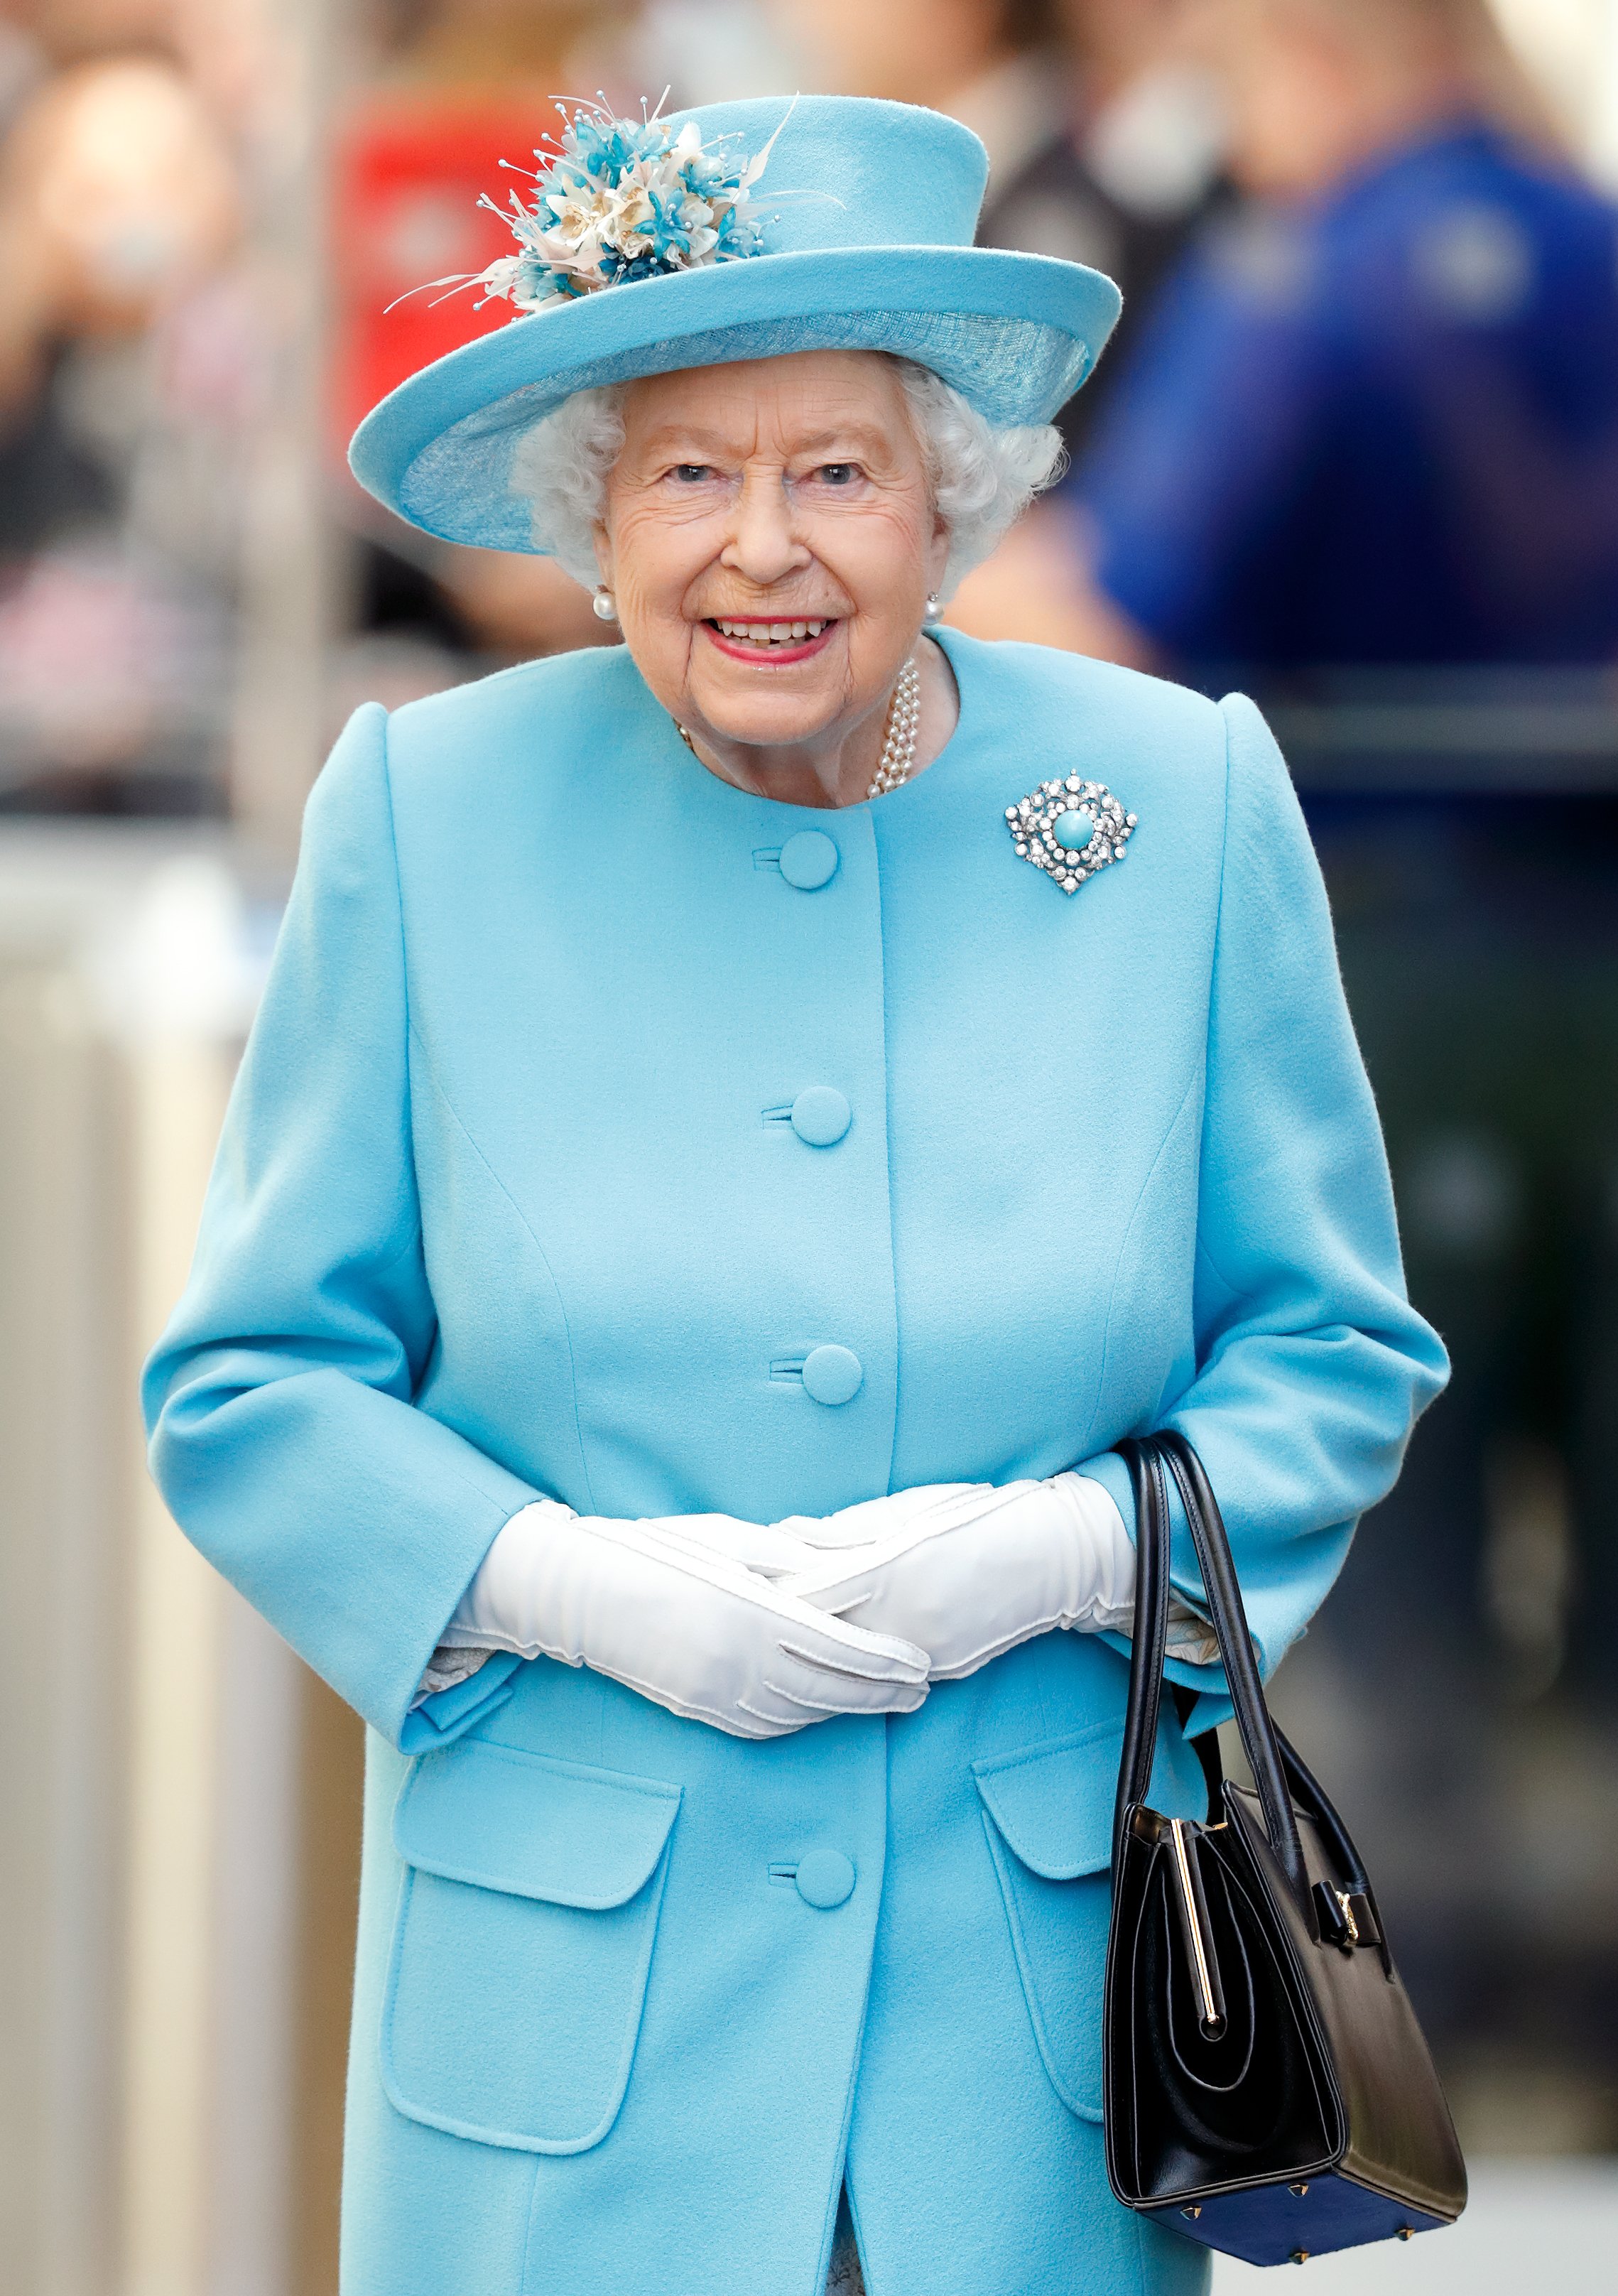 Queen Elizabeth II visiting the British Airways headquarters at Heathrow Airport on May 23, 2019 in London, England. │Source: Getty Images